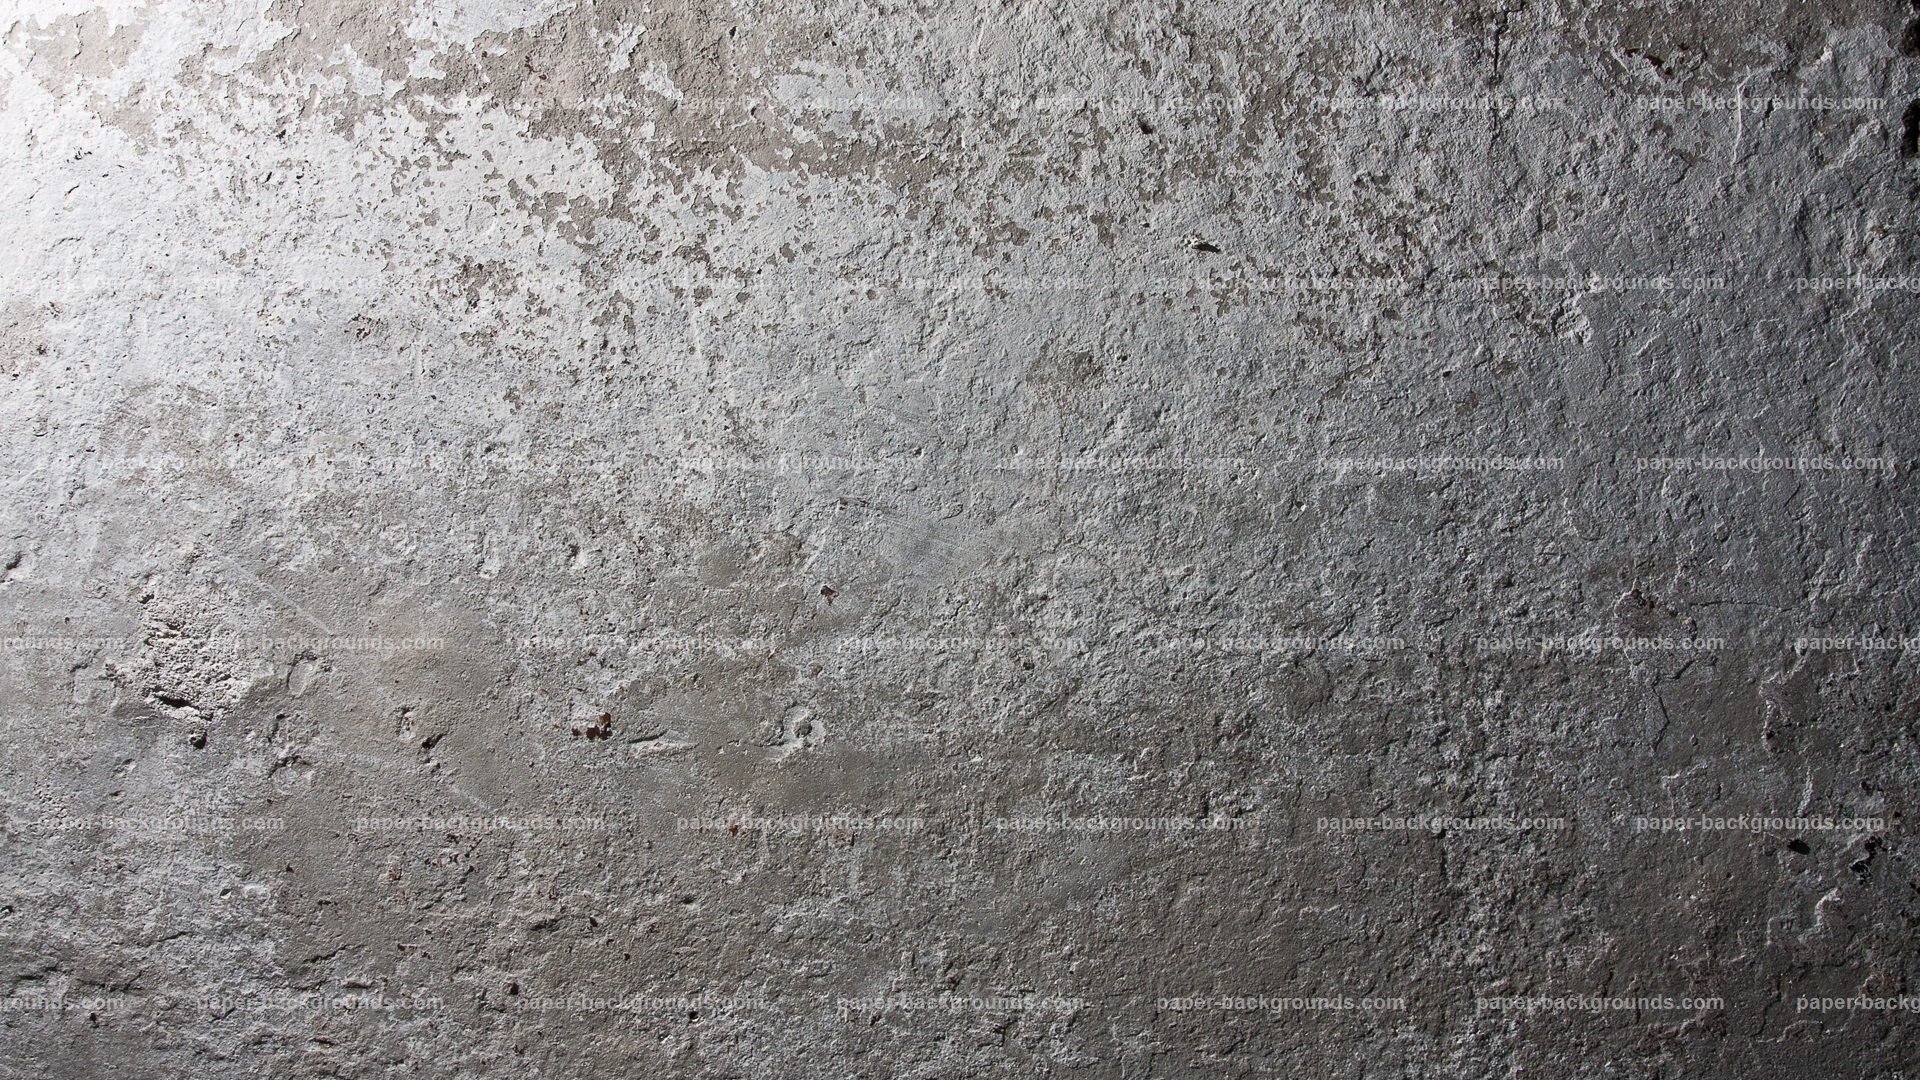 Free Download Pin Gray Concrete Wall Background Hd Paper Backgrounds 19x1080 For Your Desktop Mobile Tablet Explore 49 Cement Wallpaper Wallpaper That Looks Like Concrete Faux Concrete Wallpaper Cement Looking Wallpaper